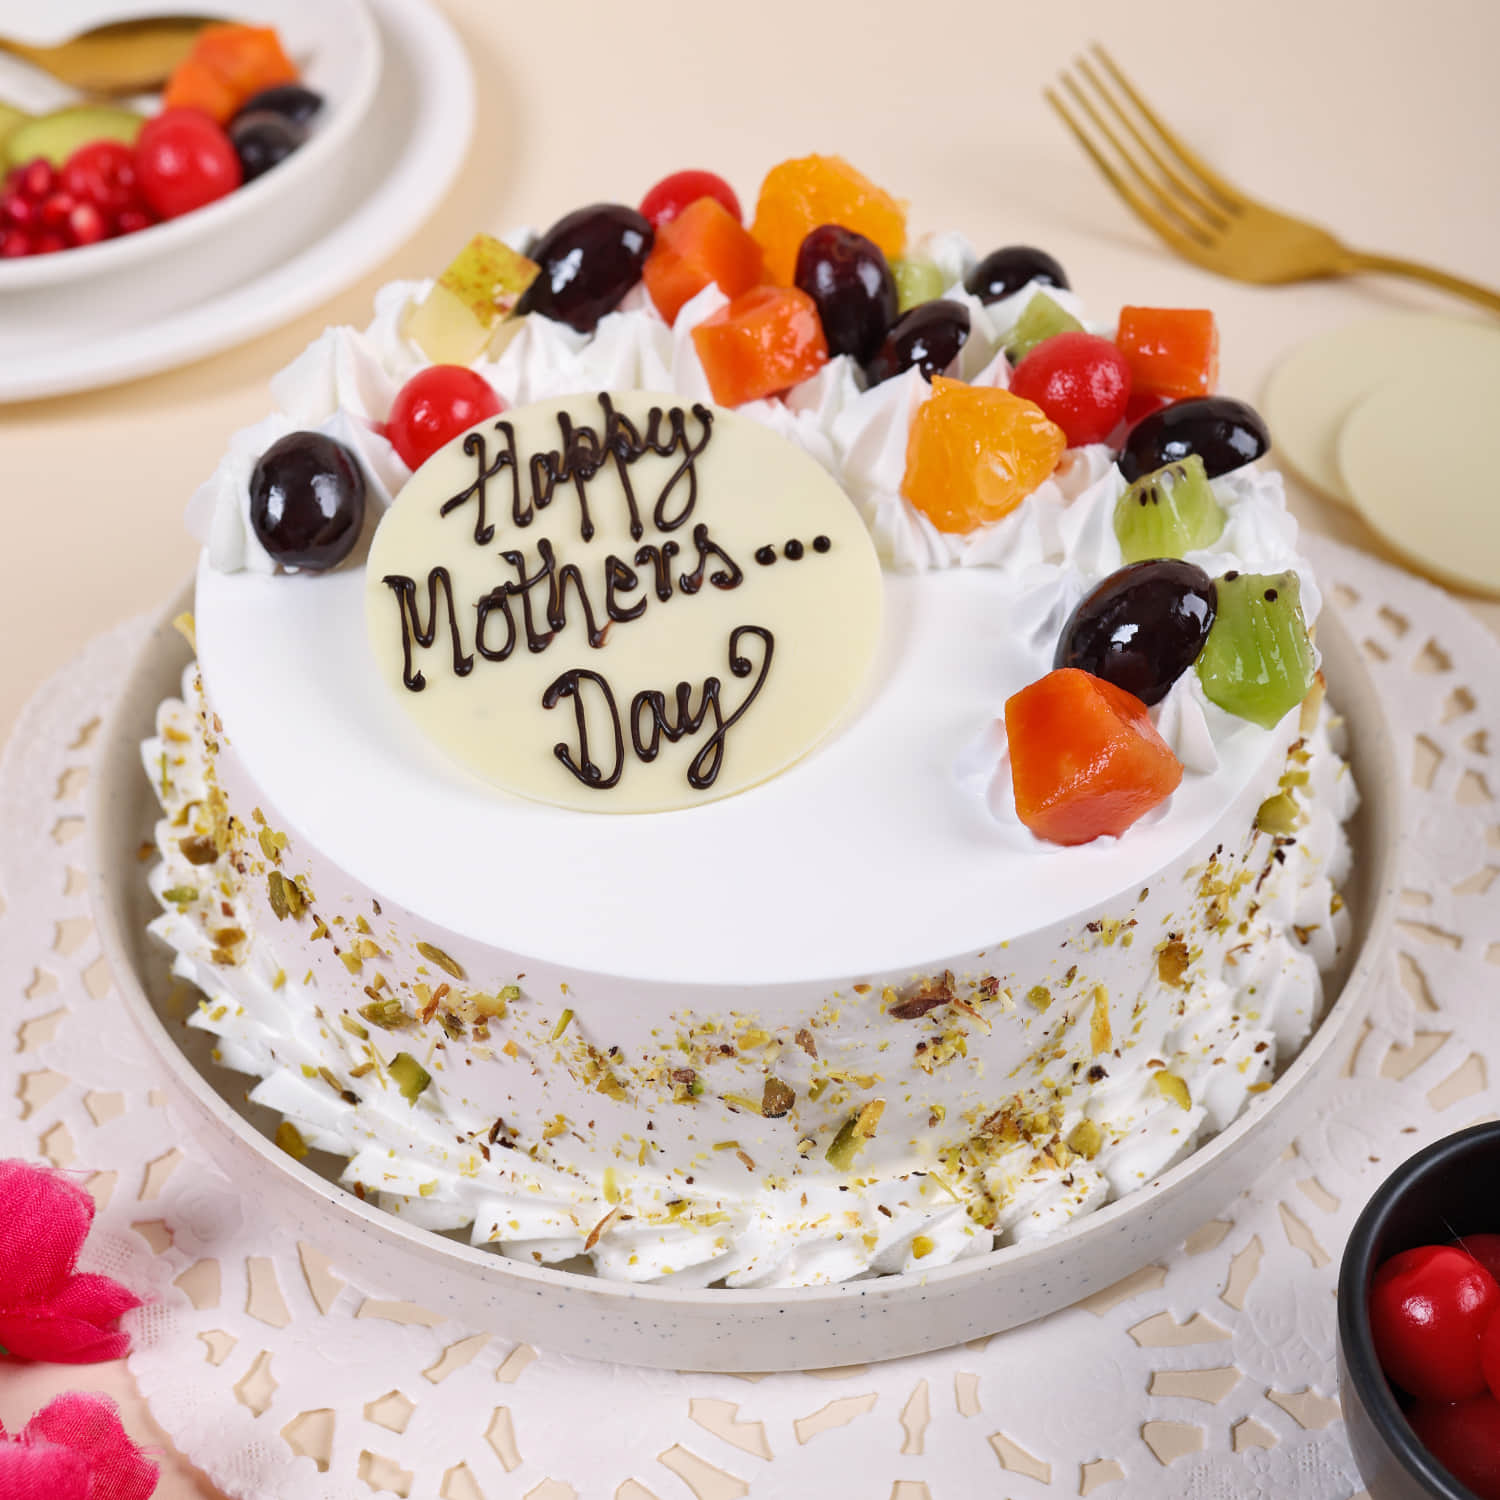 Designer Cake Ideas for Mother's Day - Cakes and Bakes Stories